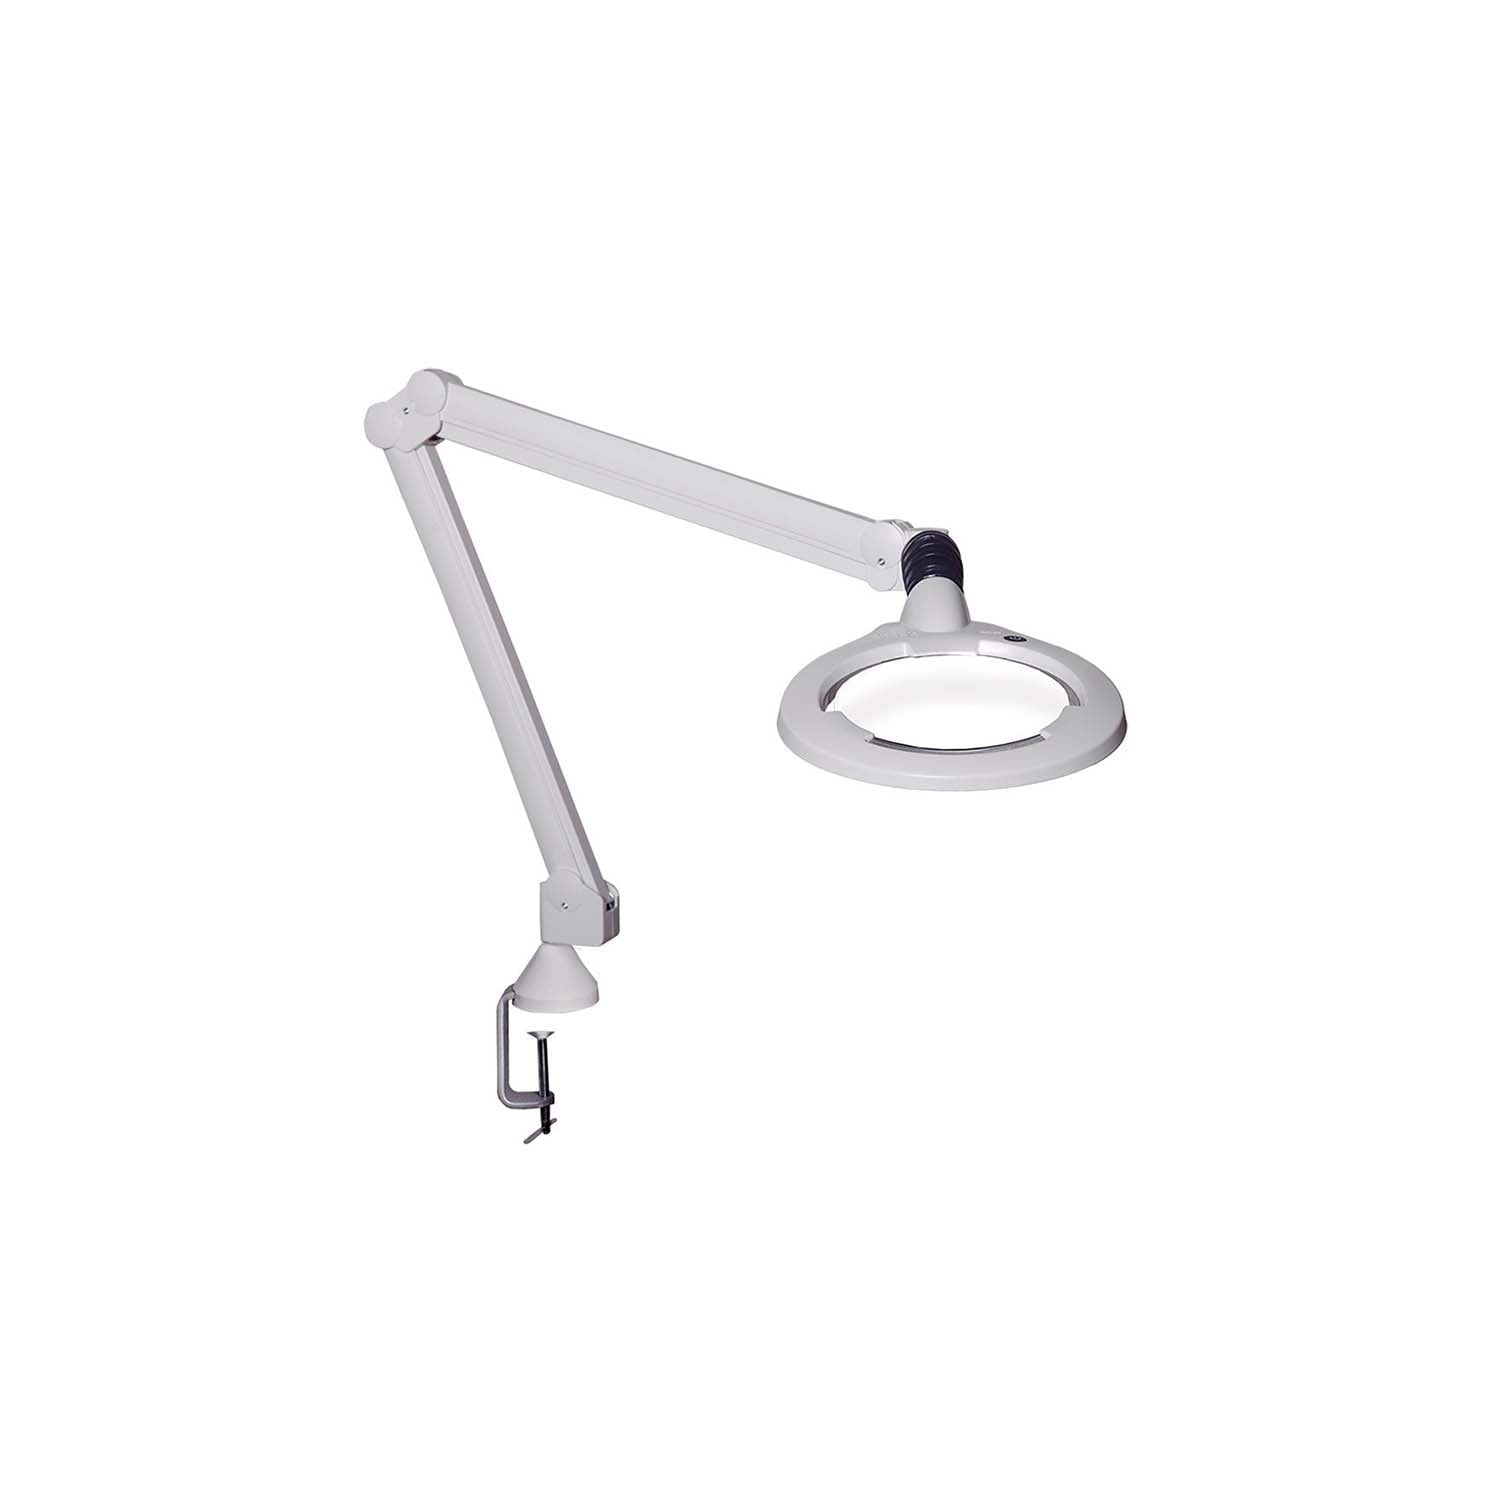 Circus LED Medical Illuminated Magnifier (Dimmable) | 5d